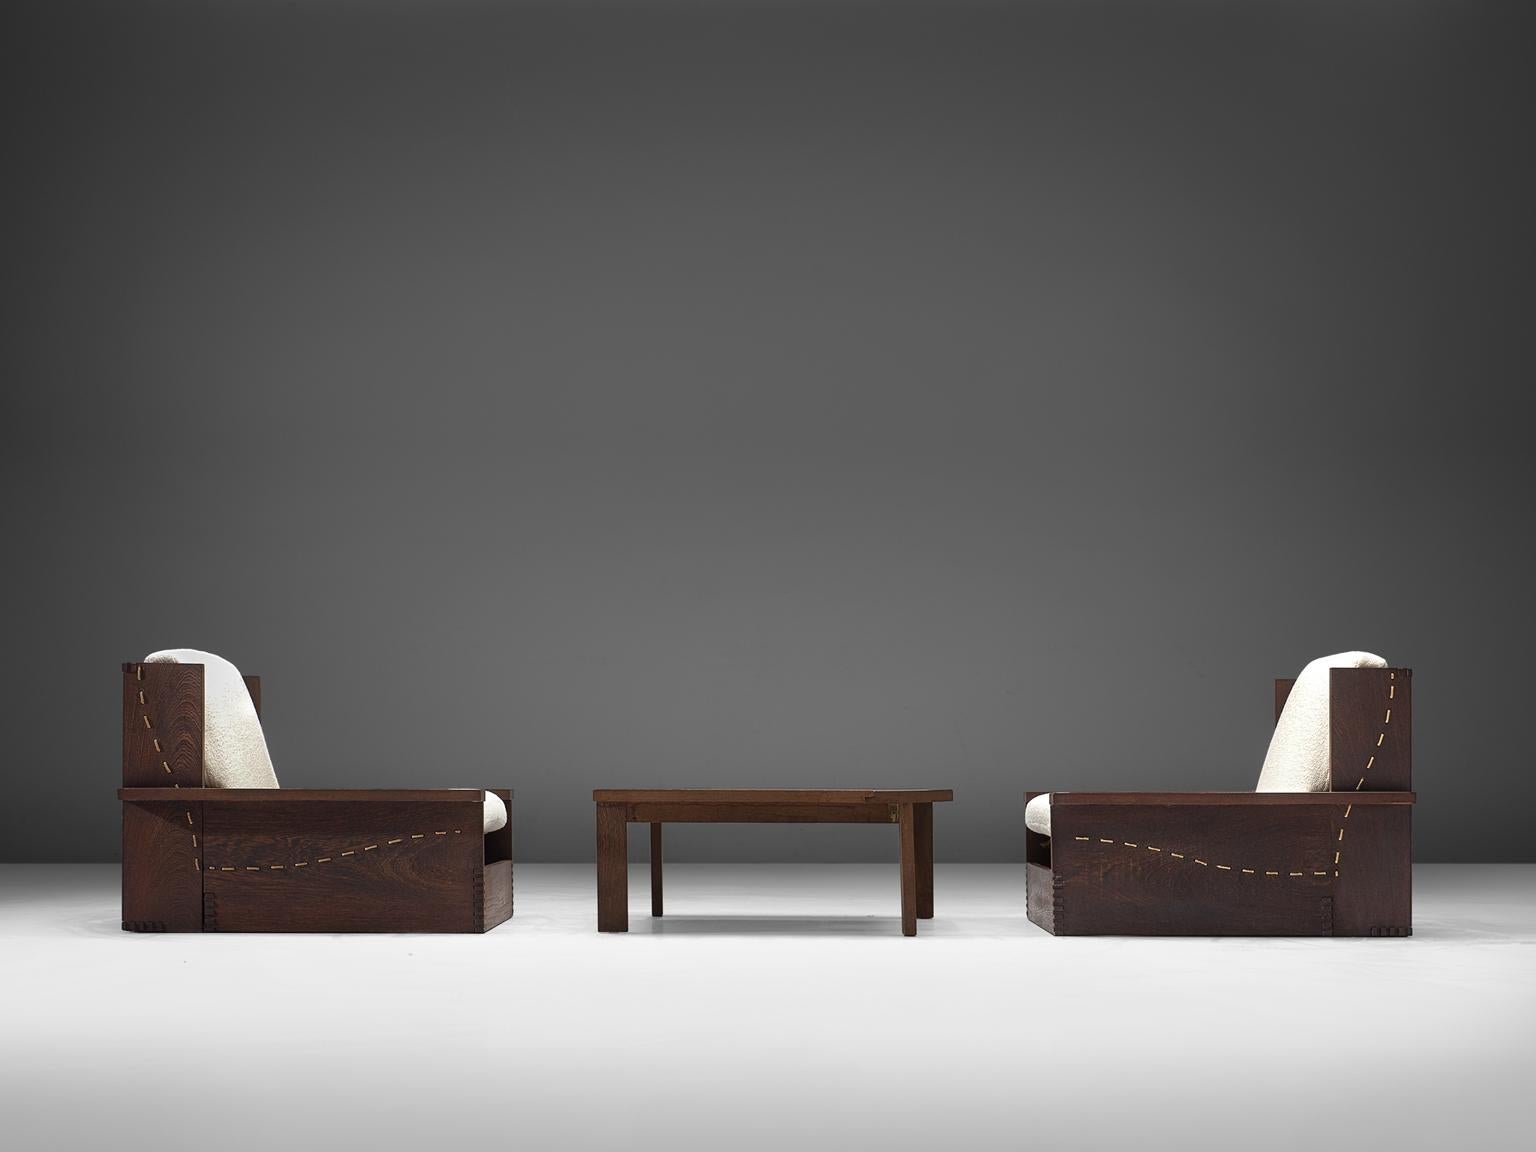 Lounge chairs and coffee table, wenge and white wool, Denmark, 1960s-1970s.

This modest, simplistic set of wengé chairs has a very robust yet detailed details. The cushions are reupholstered with a thick white woollen Pierre Frey. The design of